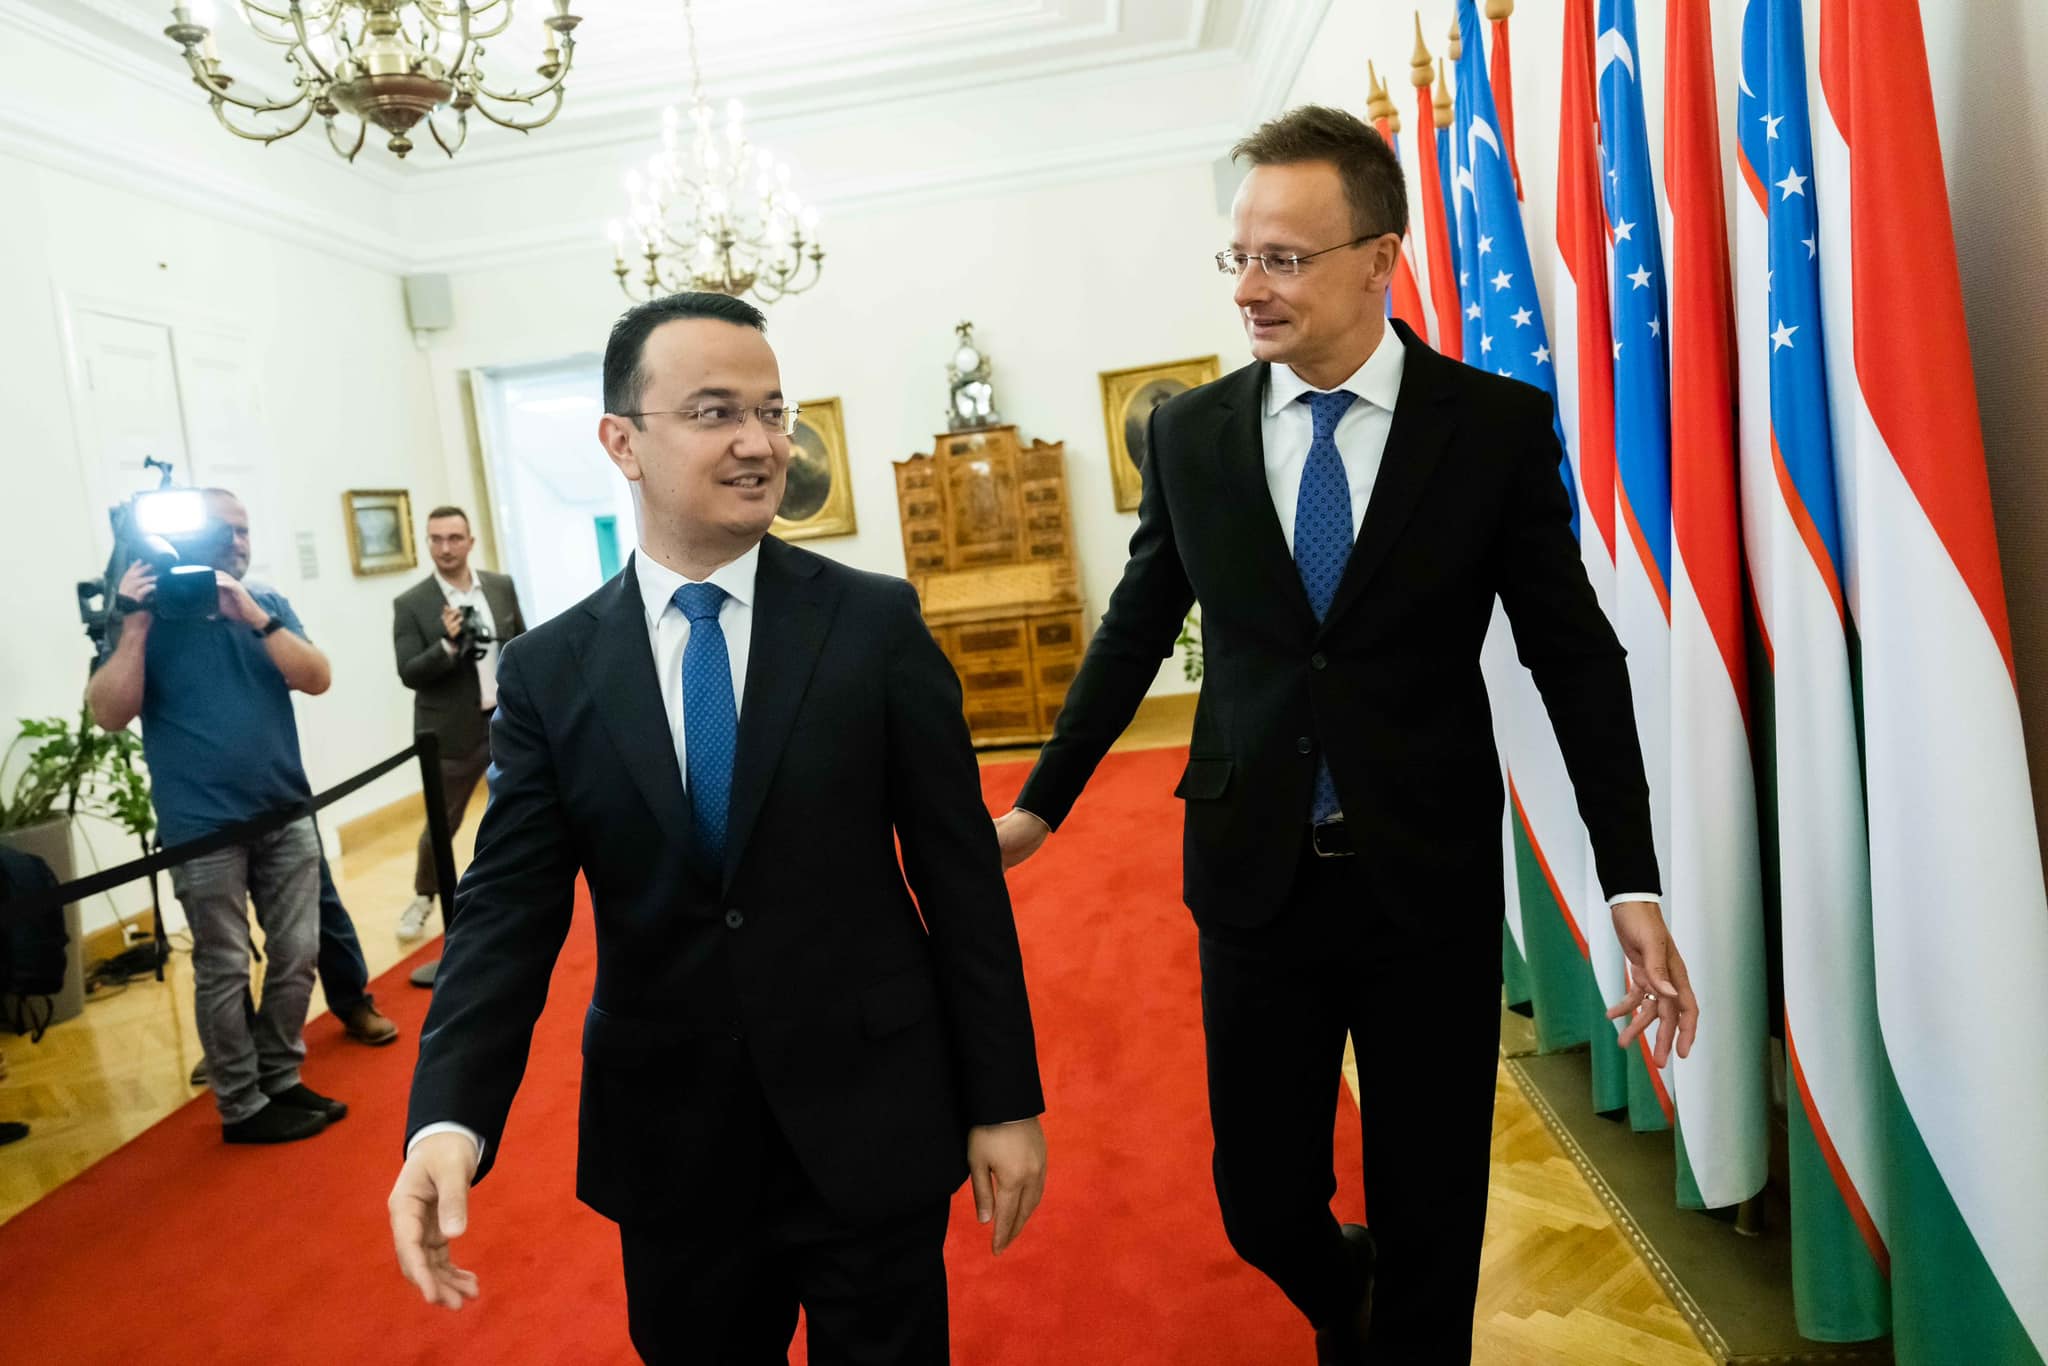 New Agreements to Further Strengthen Hungarian-Uzbek Relations